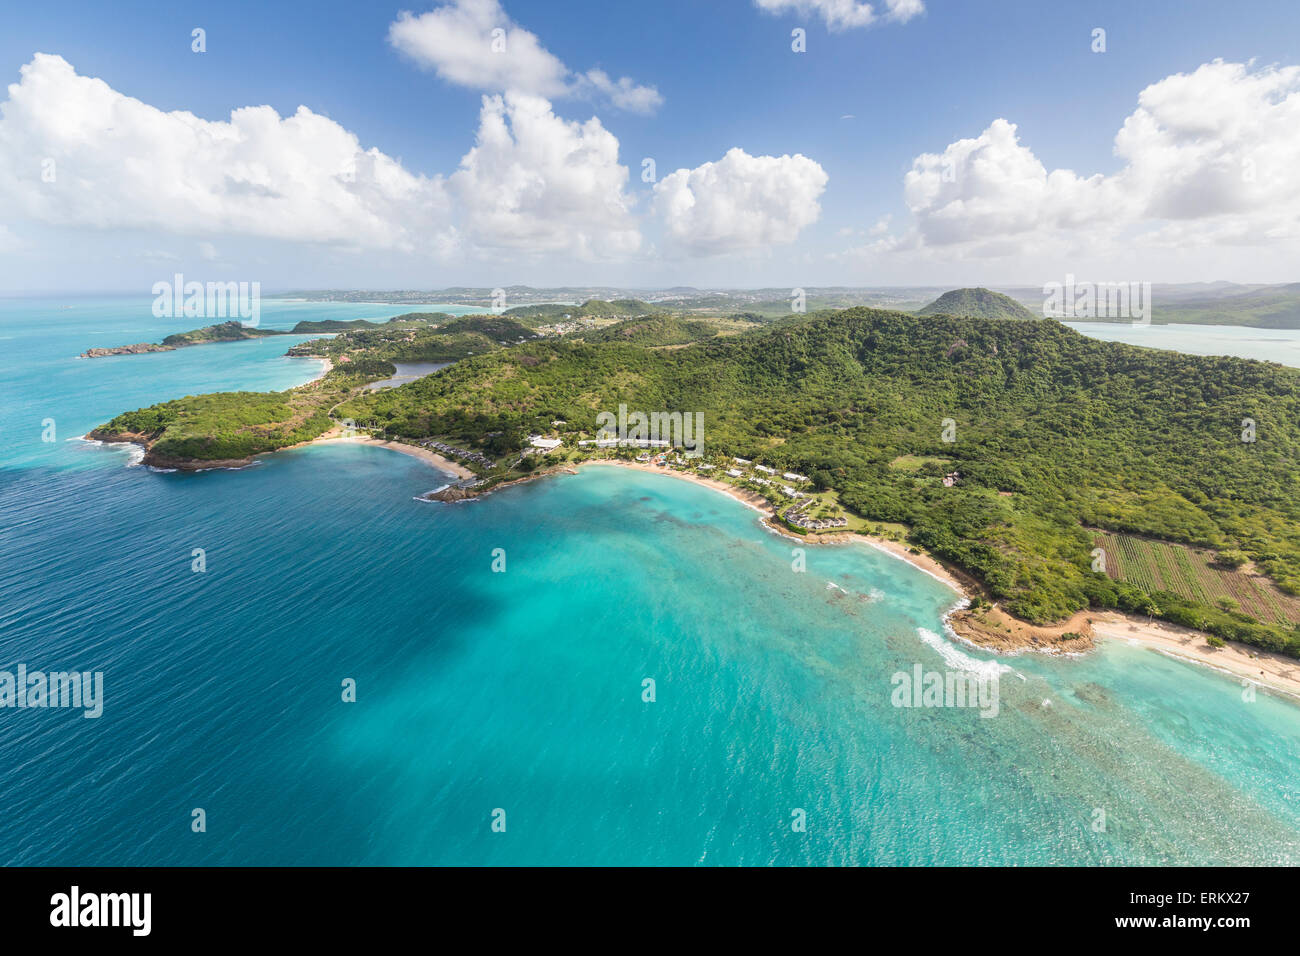 Aerial view of the rugged coast of Antigua full of bays and beaches fringed by dense tropical vegetation, Antigua Stock Photo